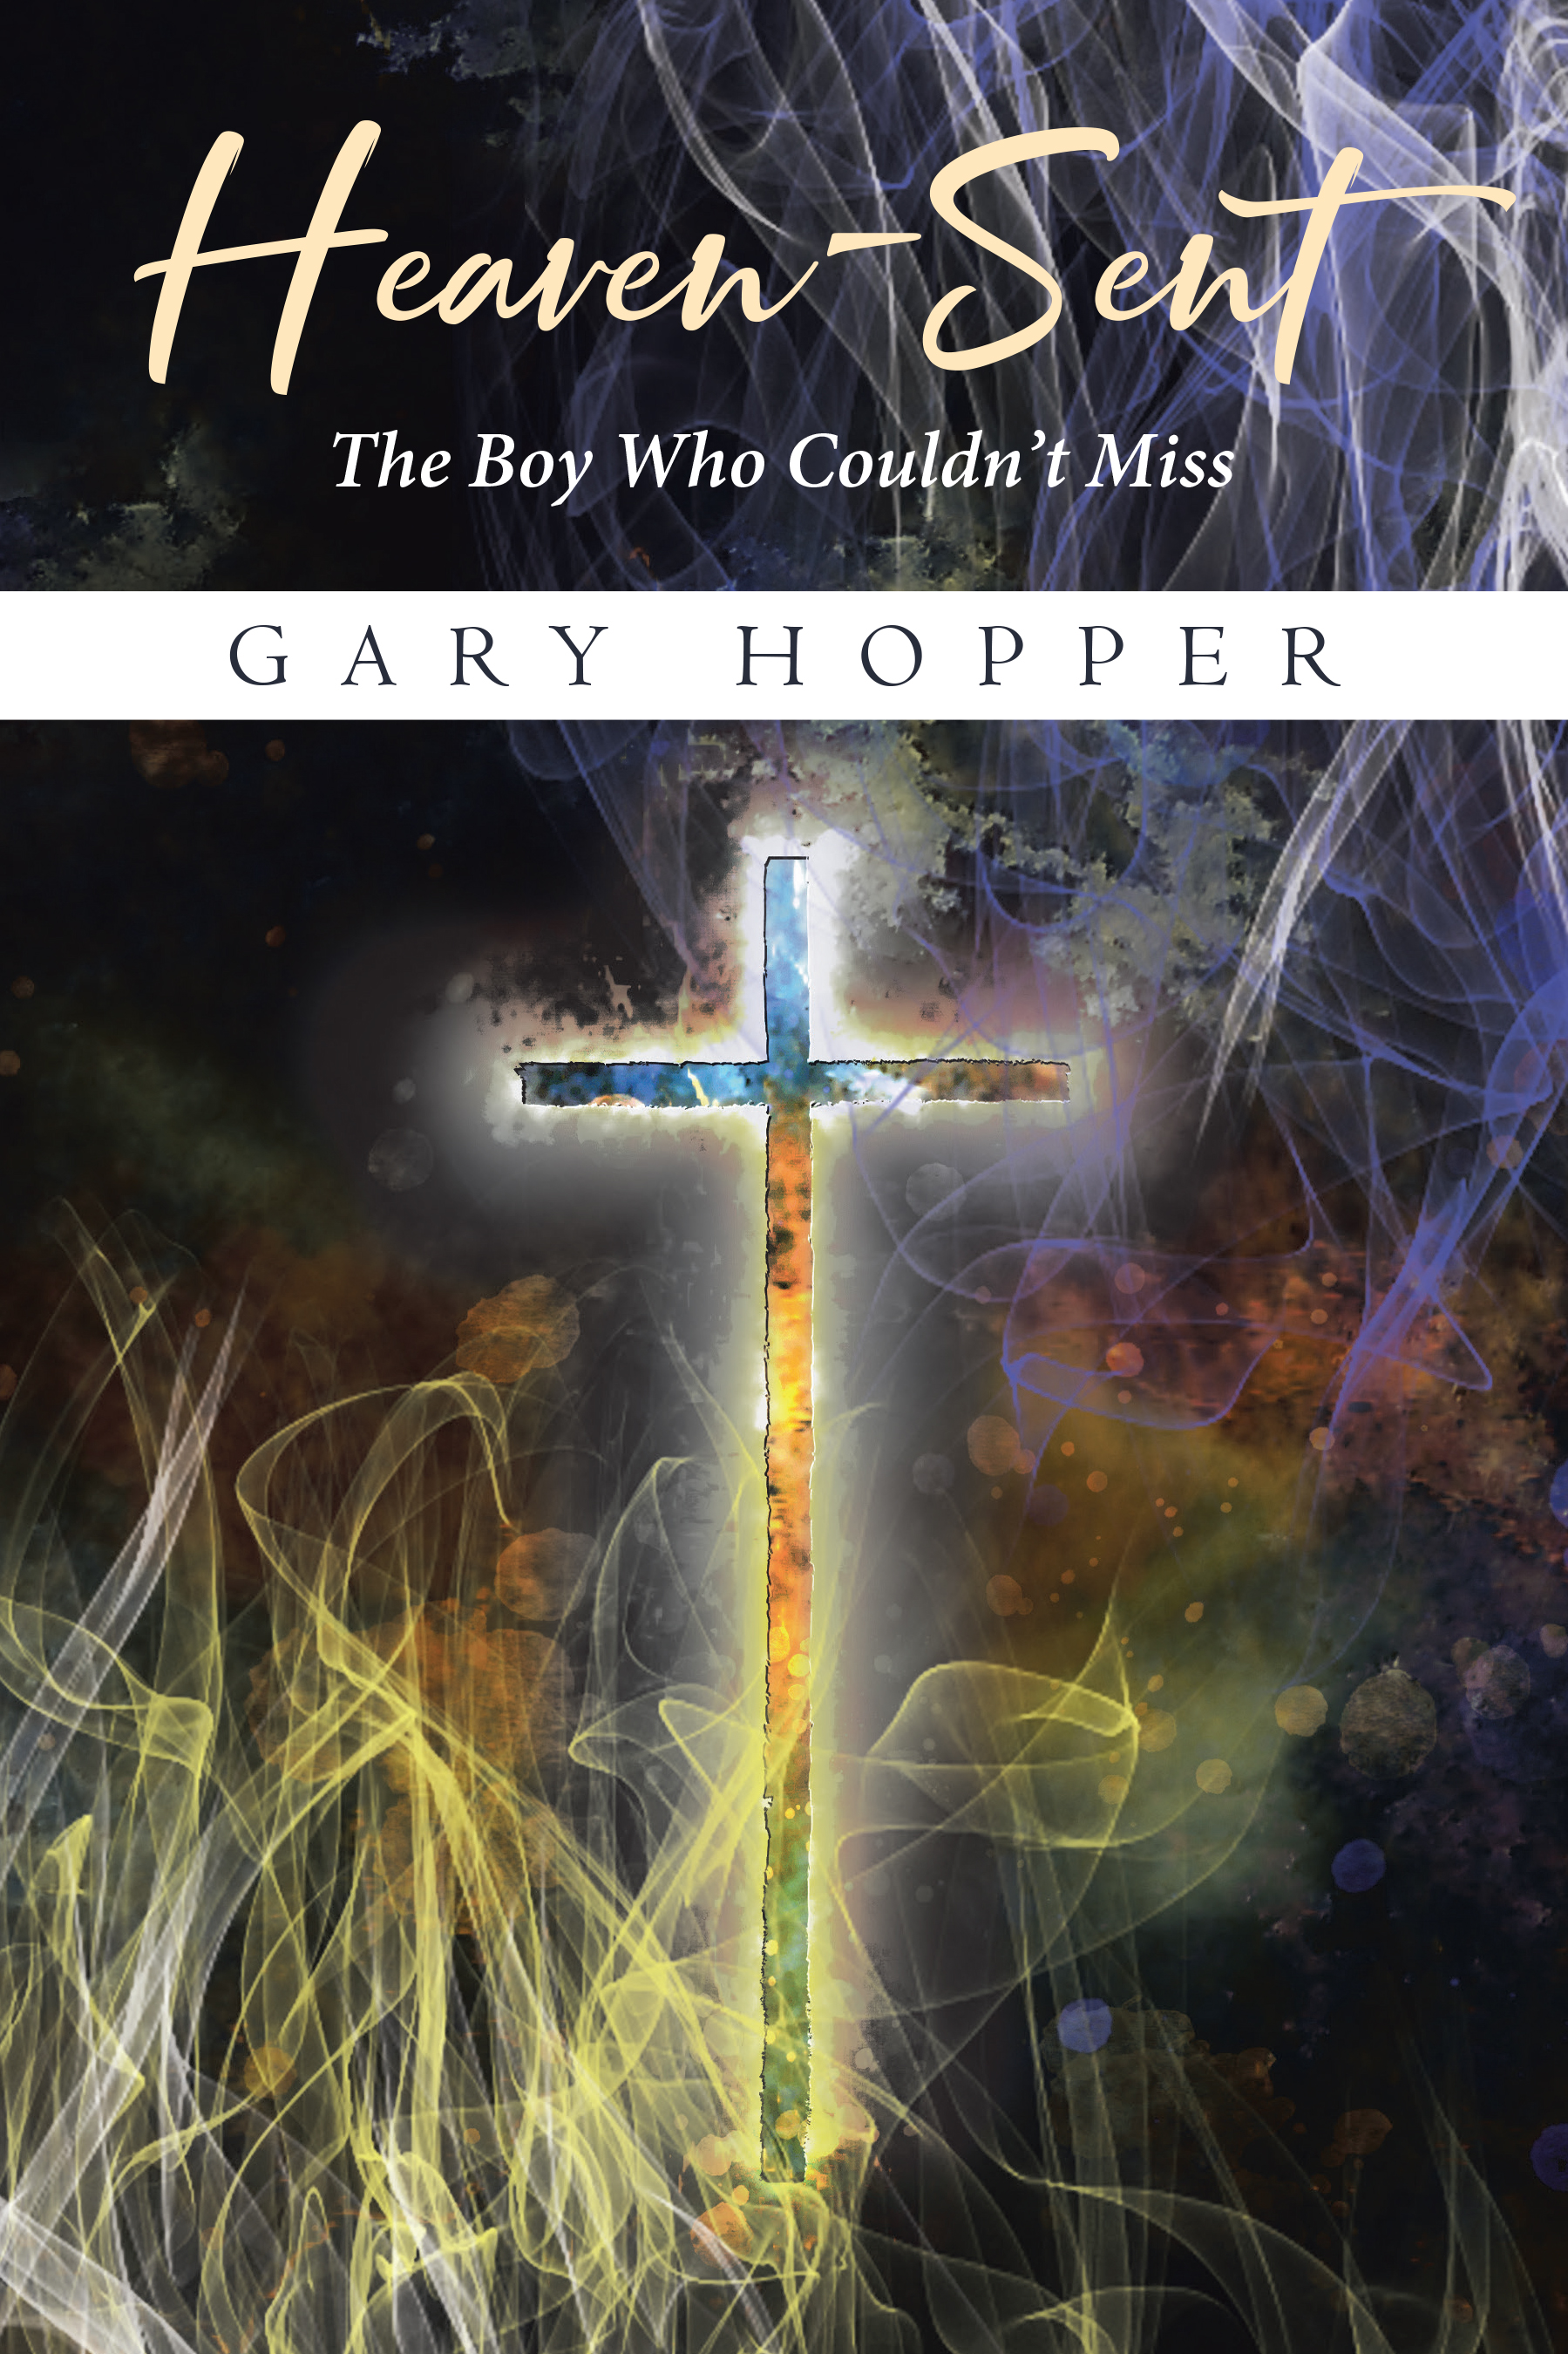 Author Gary Hopper’s New Book, "Heaven-Sent: The Boy Who Couldn't Miss," is a Fictional Story Based on Faith, Family, and a Dash of Heavenly Inspiration